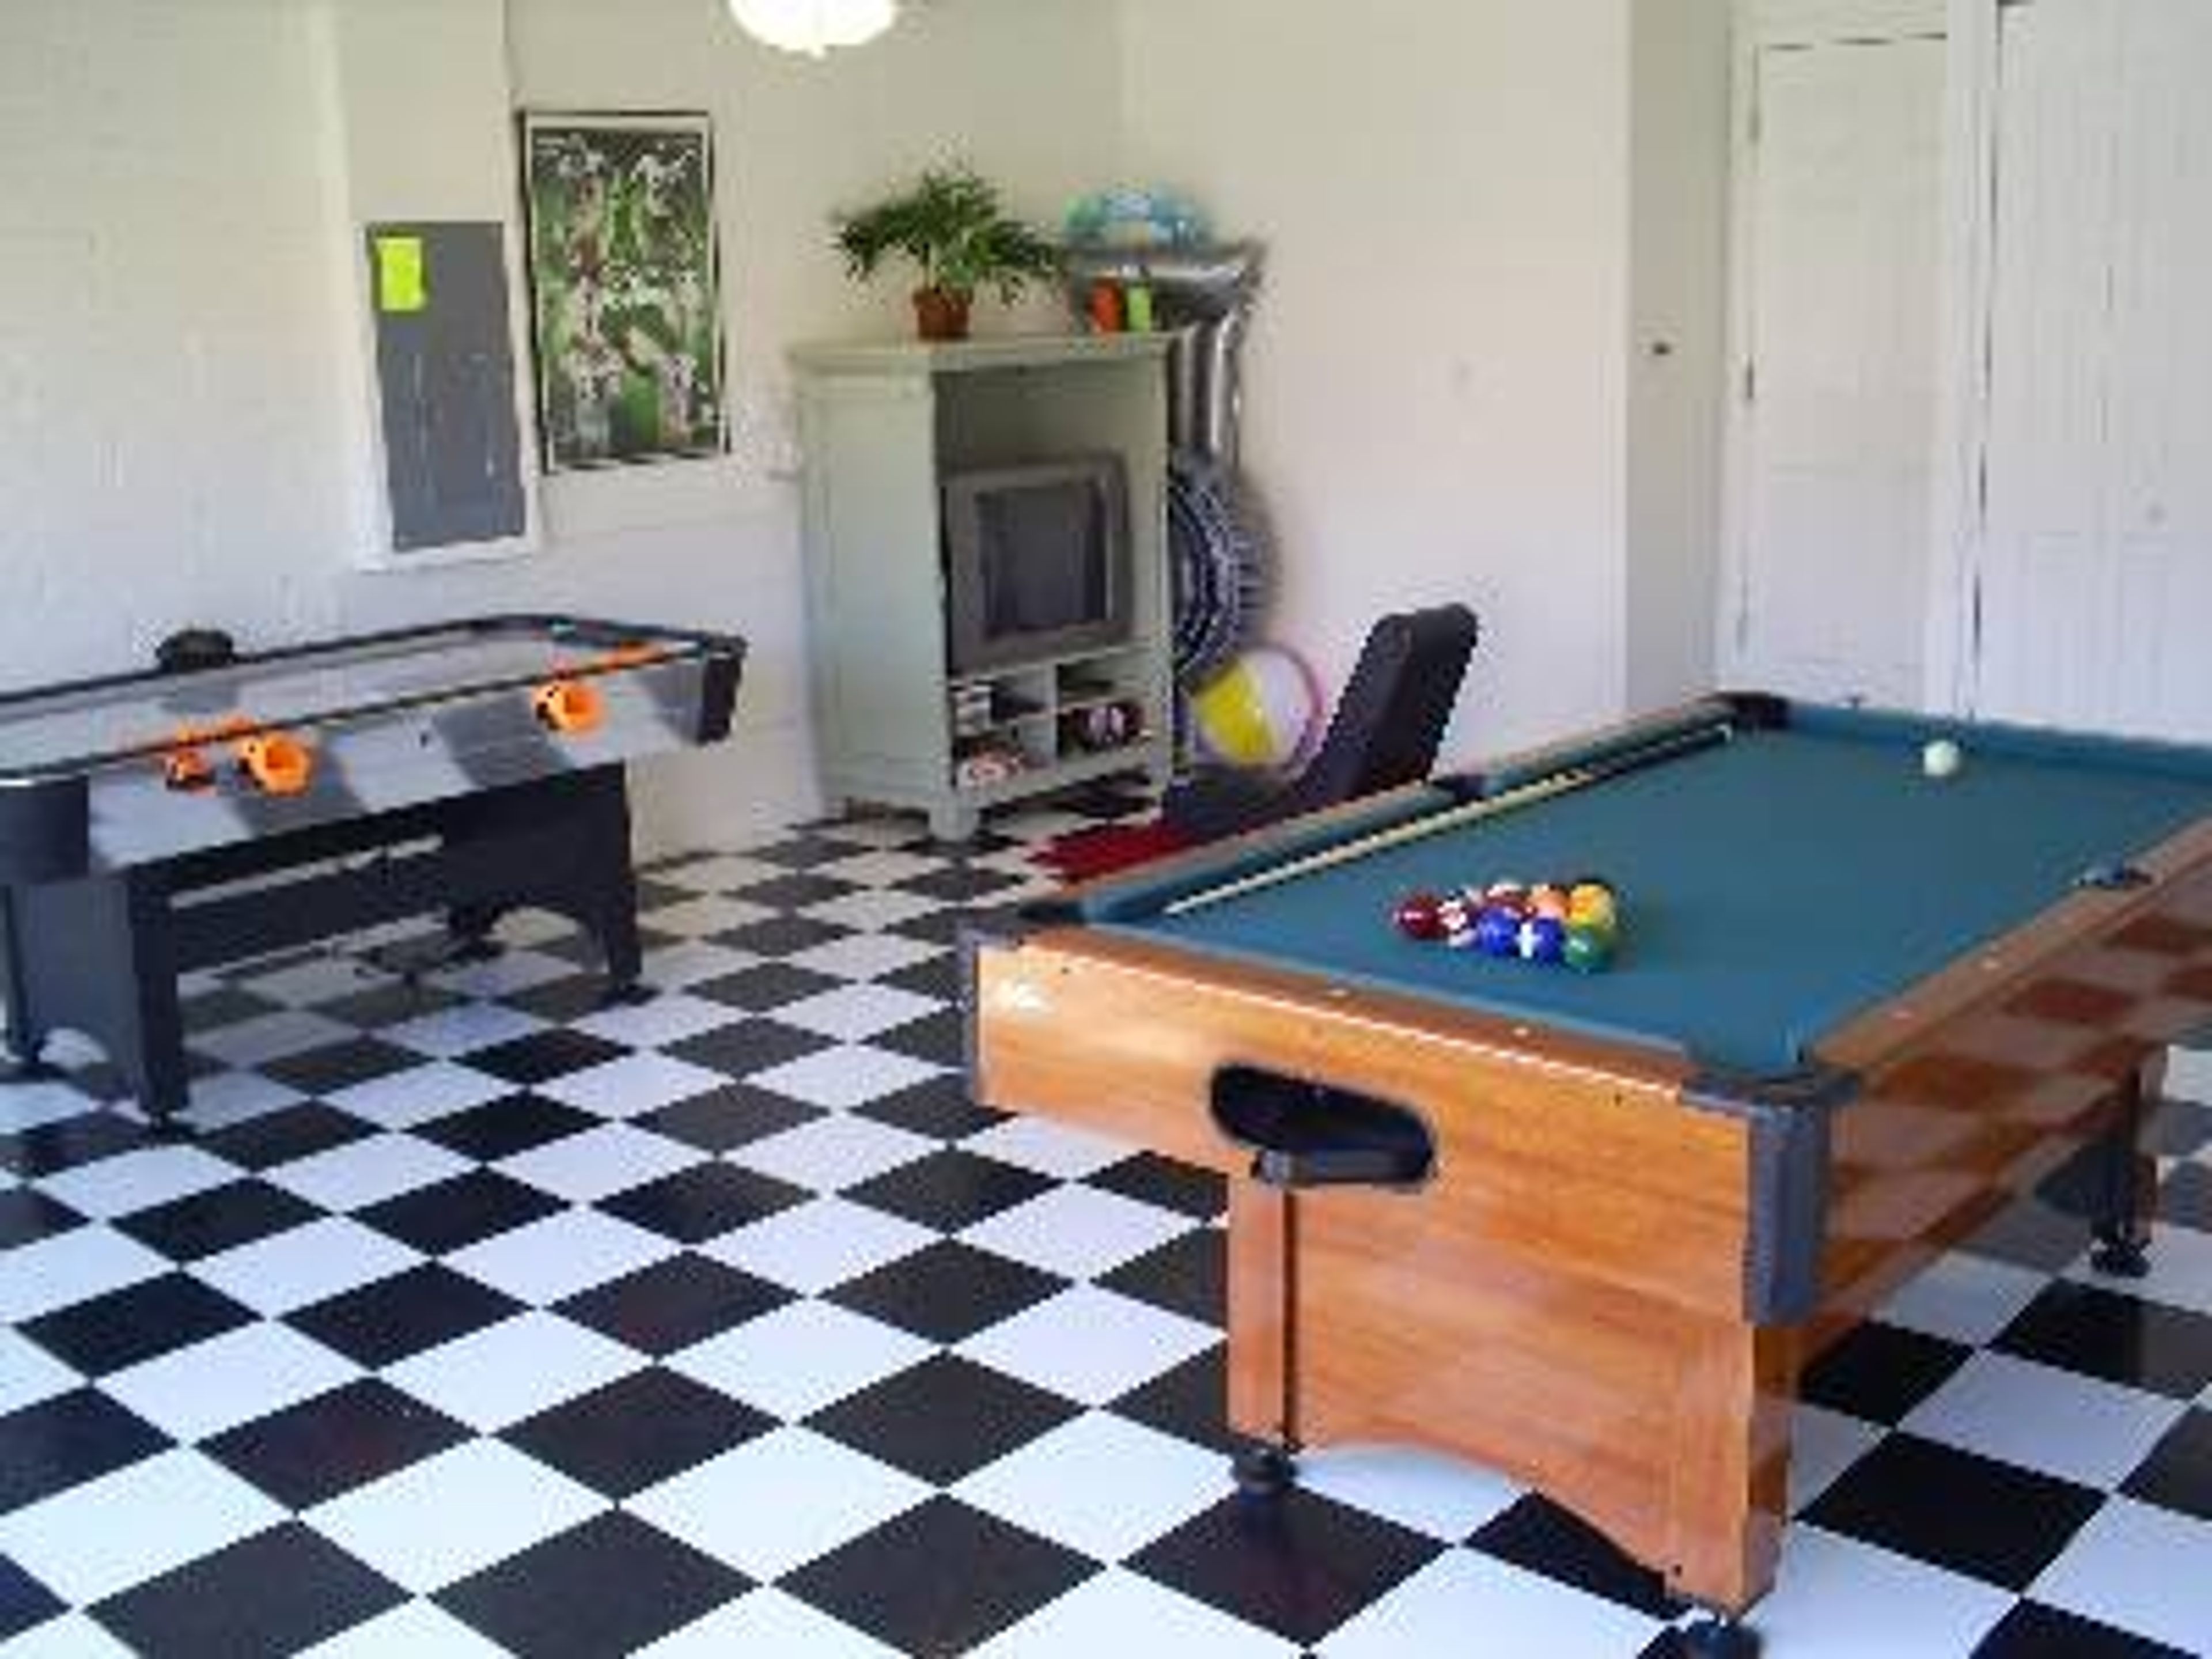 Your own private games room